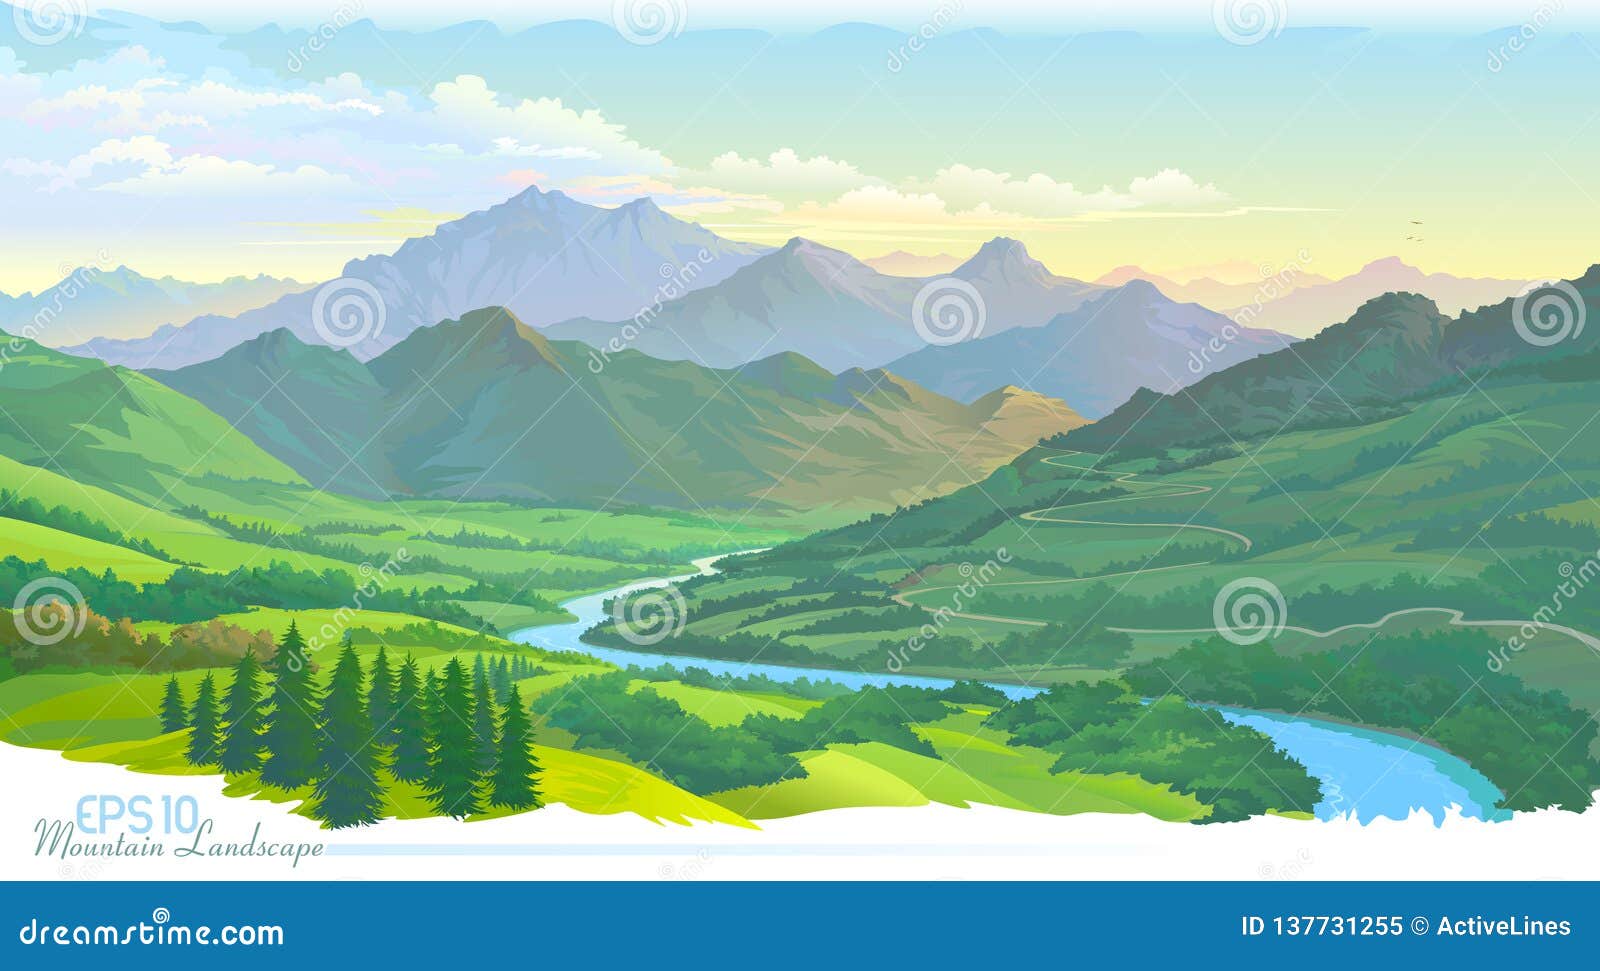 the mountains, the meadows, the green landscape and the river.  image.